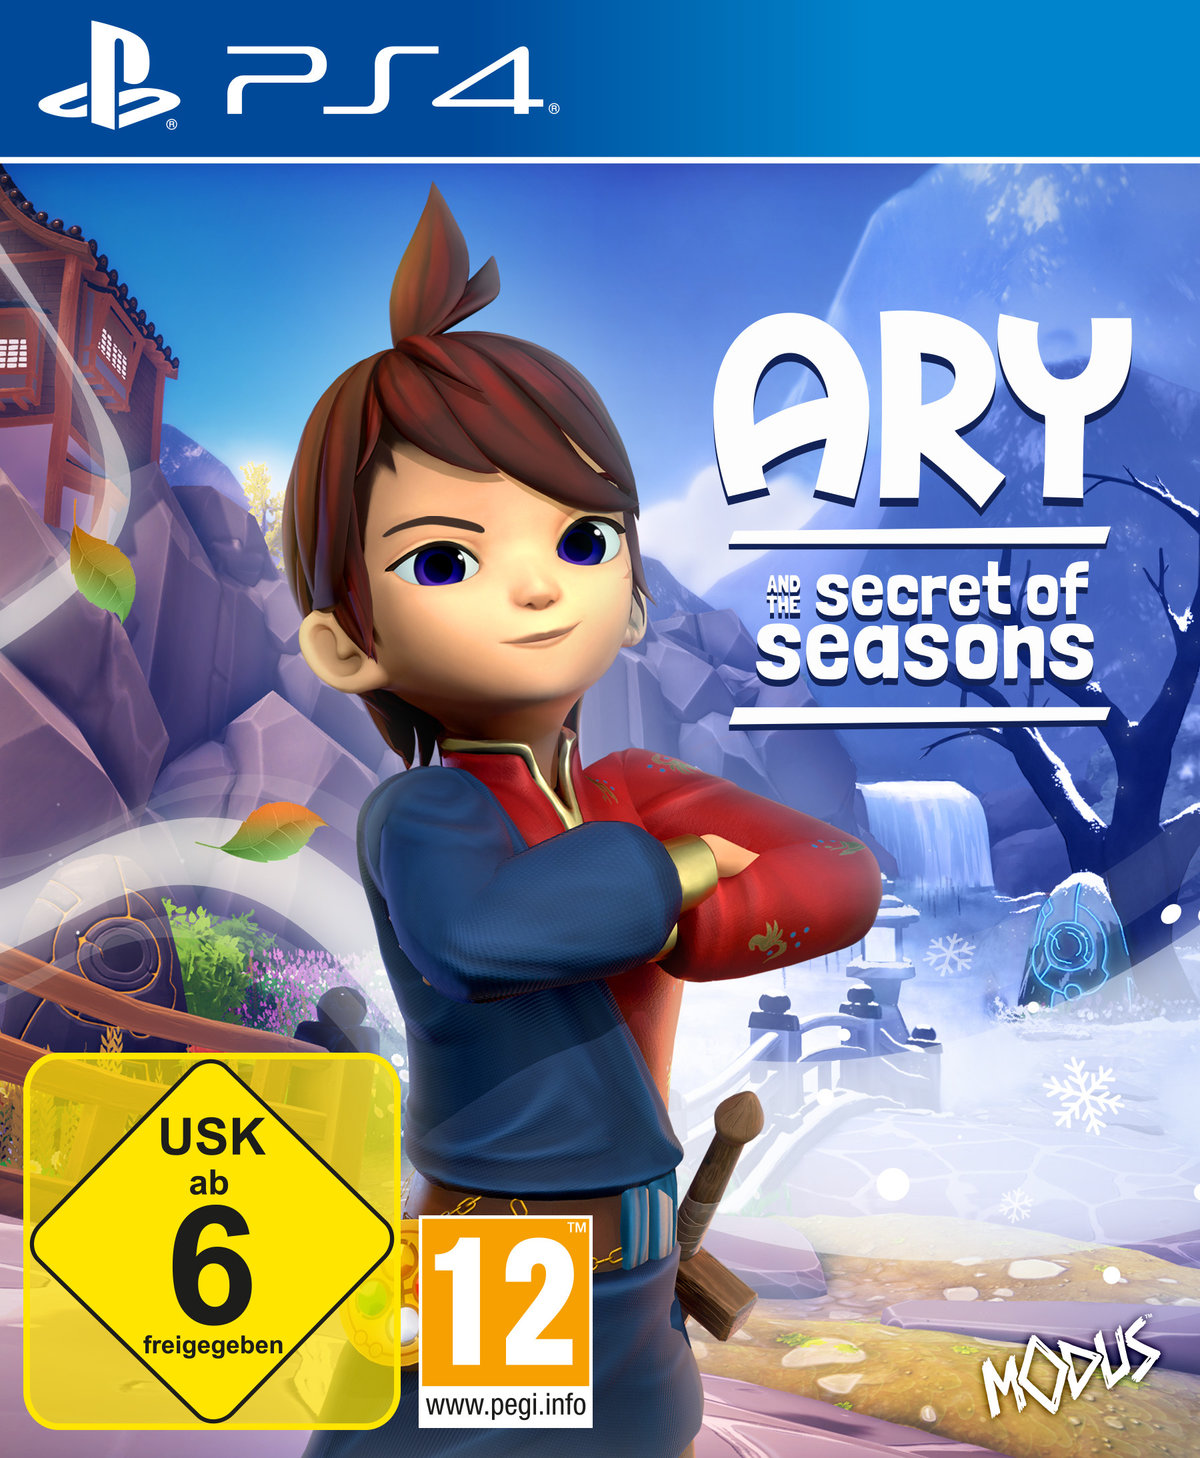 PS-4 - Secret of [PlayStation and Seasons the Ary 4]